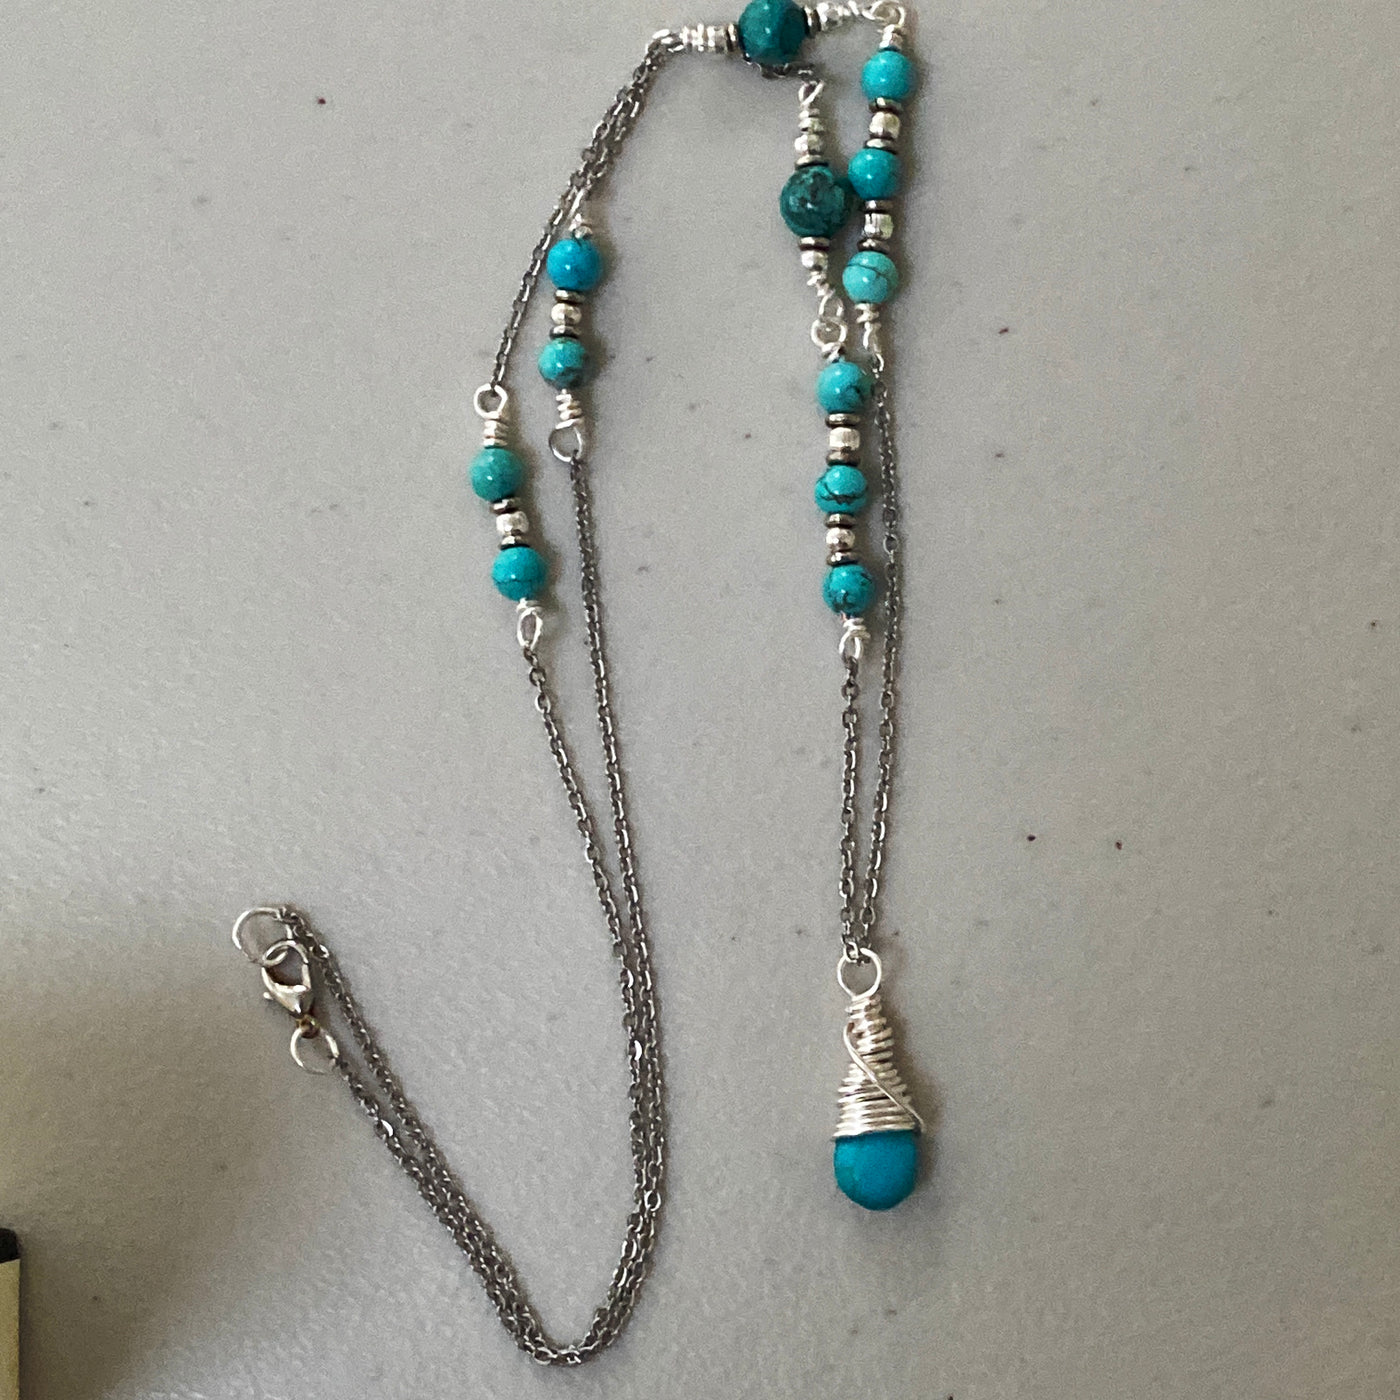 Turquoise, African turquoise and blue howlite briolette pendant. This is a long pendant in silver